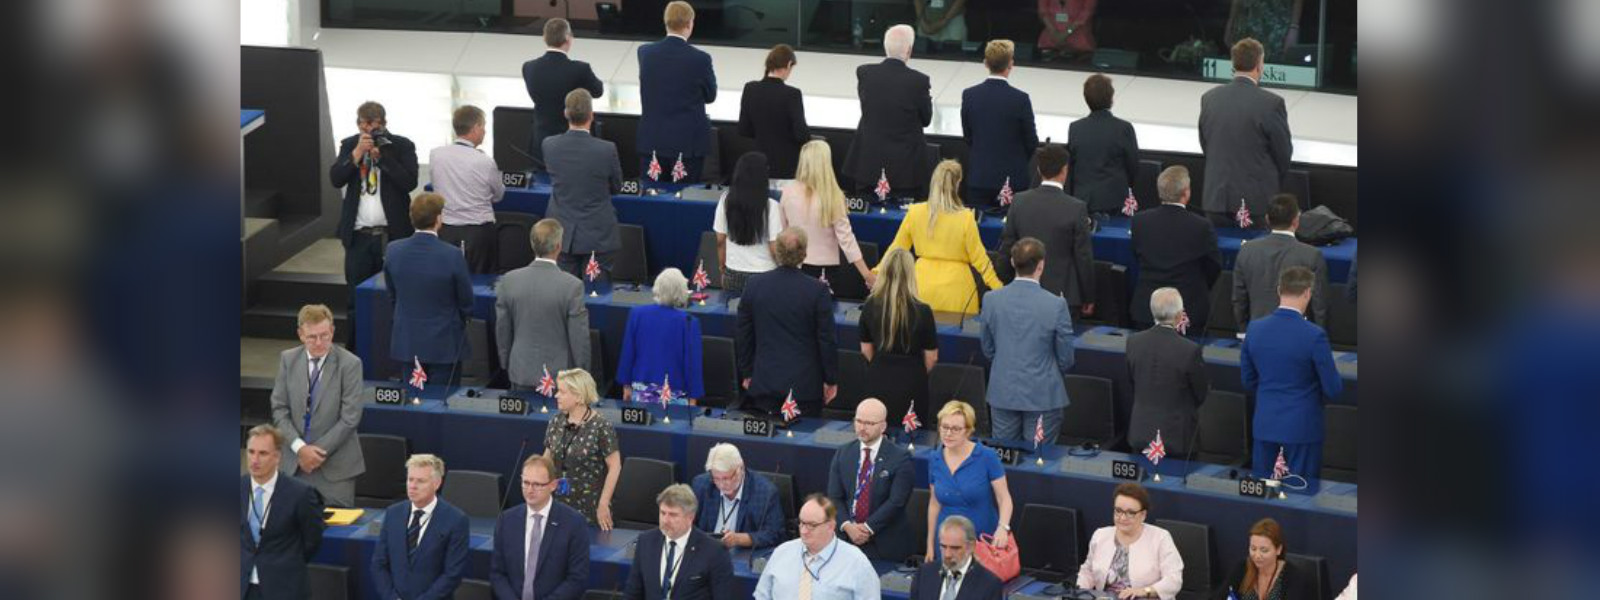 Brexit party MEPs turn backs on Ode to Joy at European parliament